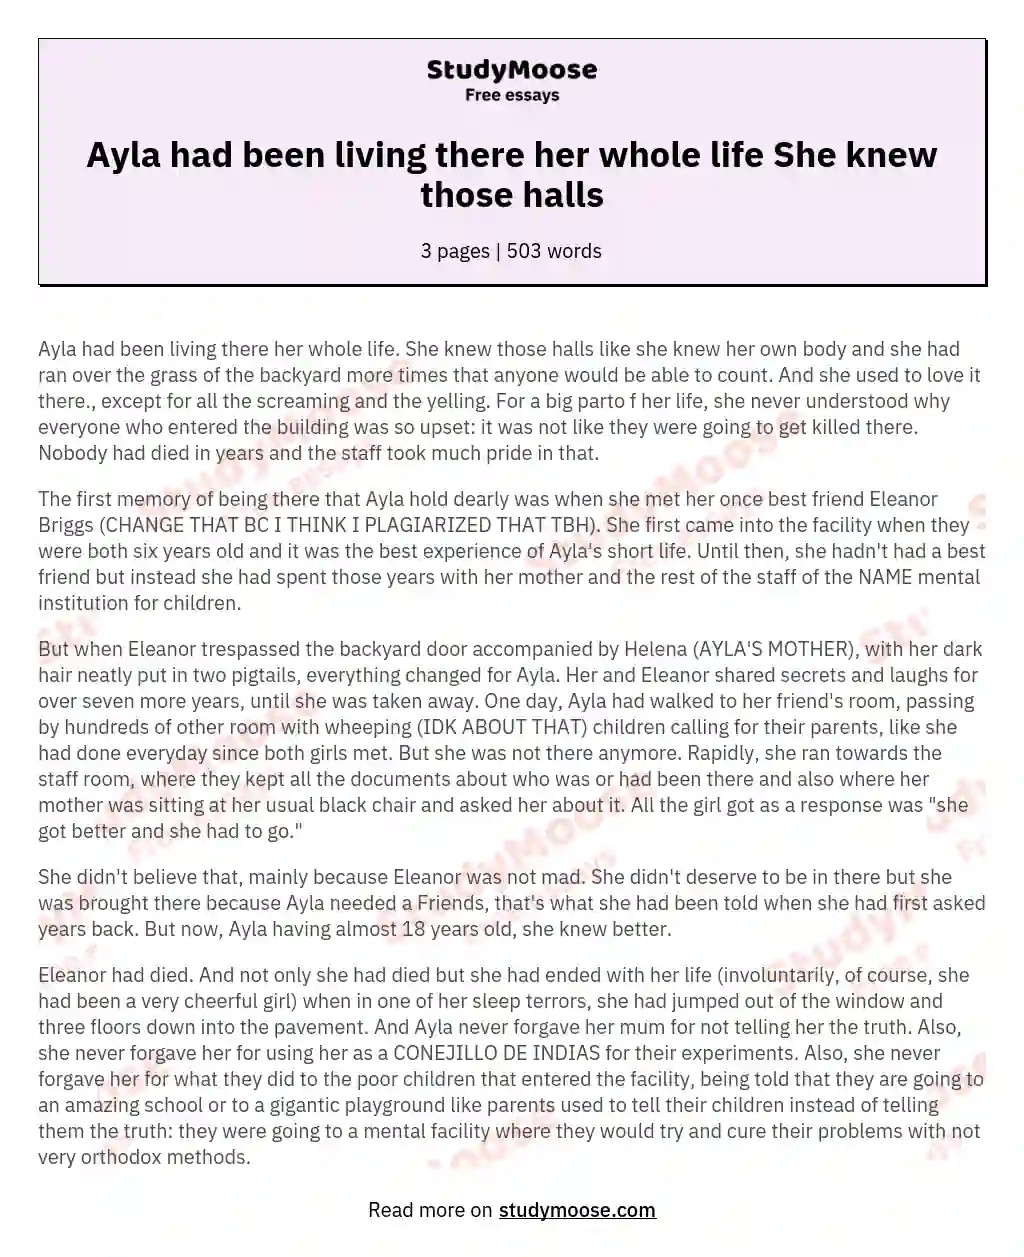 Ayla had been living there her whole life She knew those halls essay